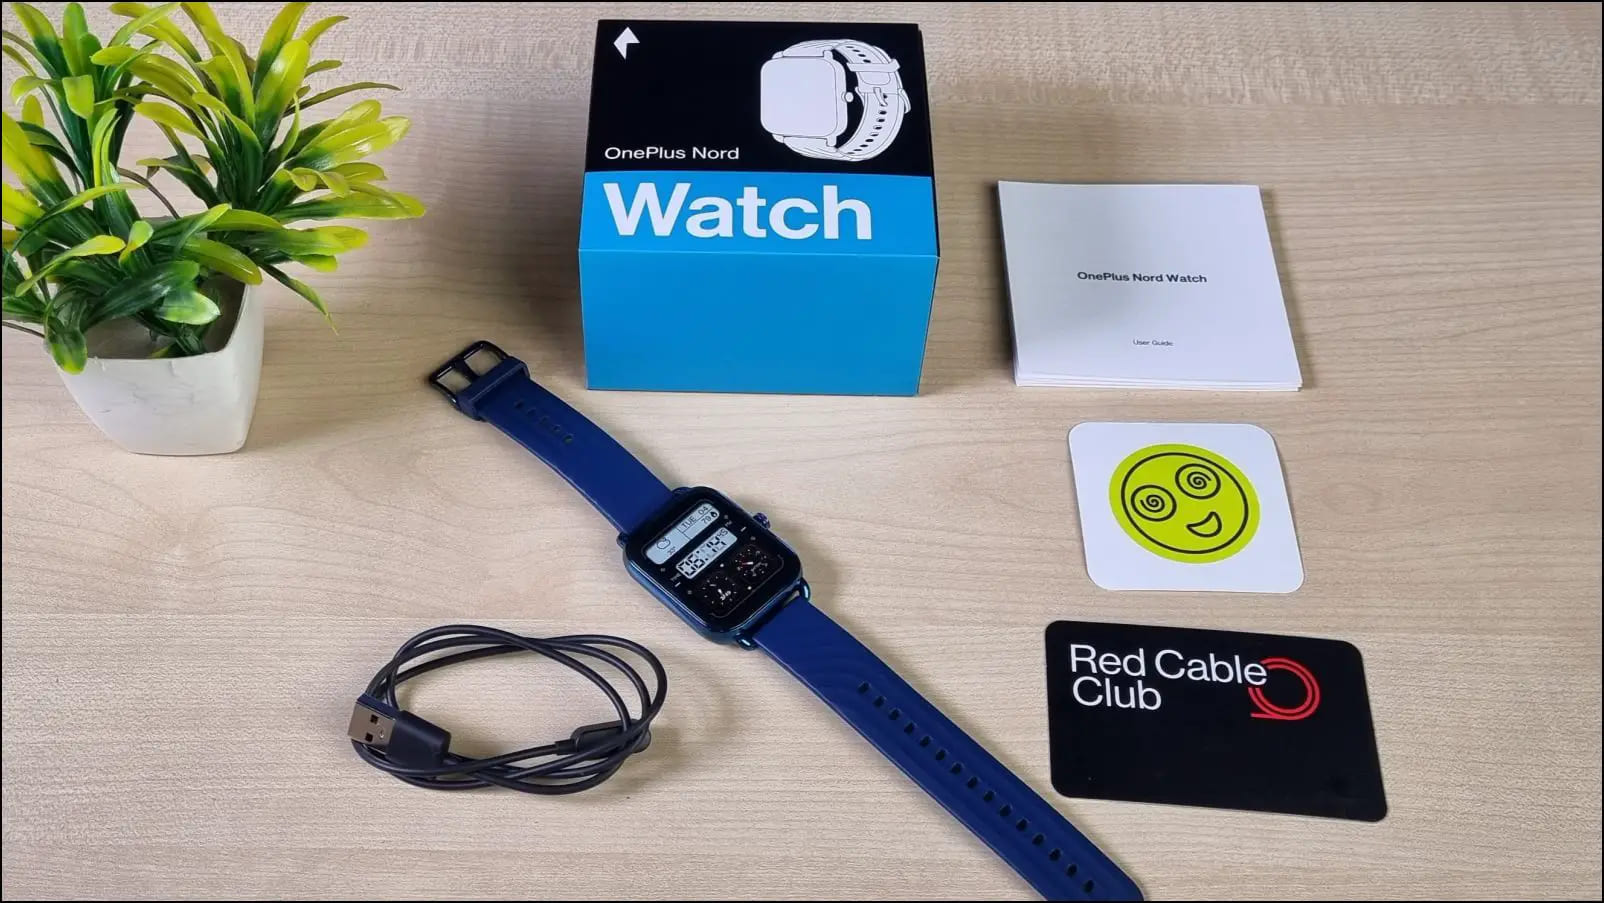 OnePlus Nord Watch with Box Contents